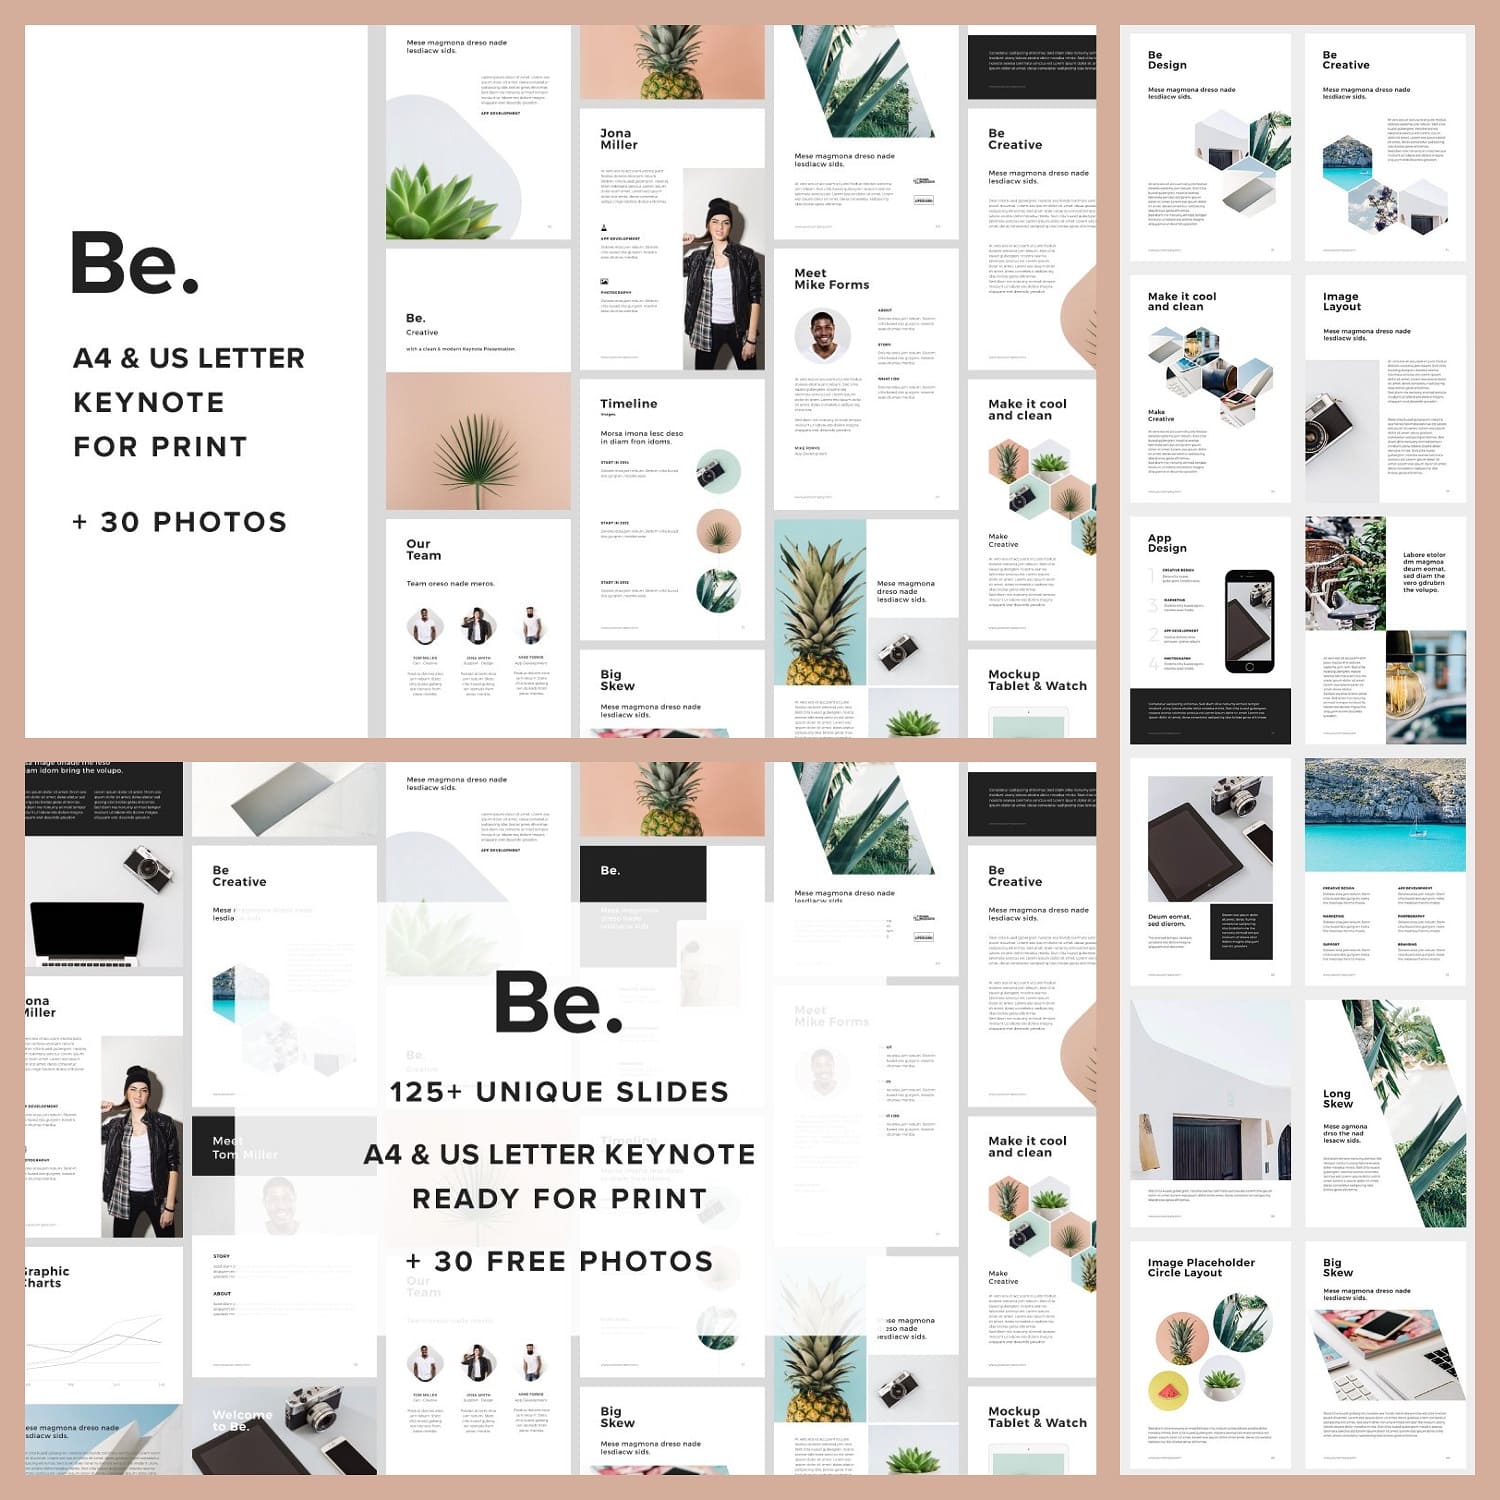 Make your presentation cool and clean with Be.